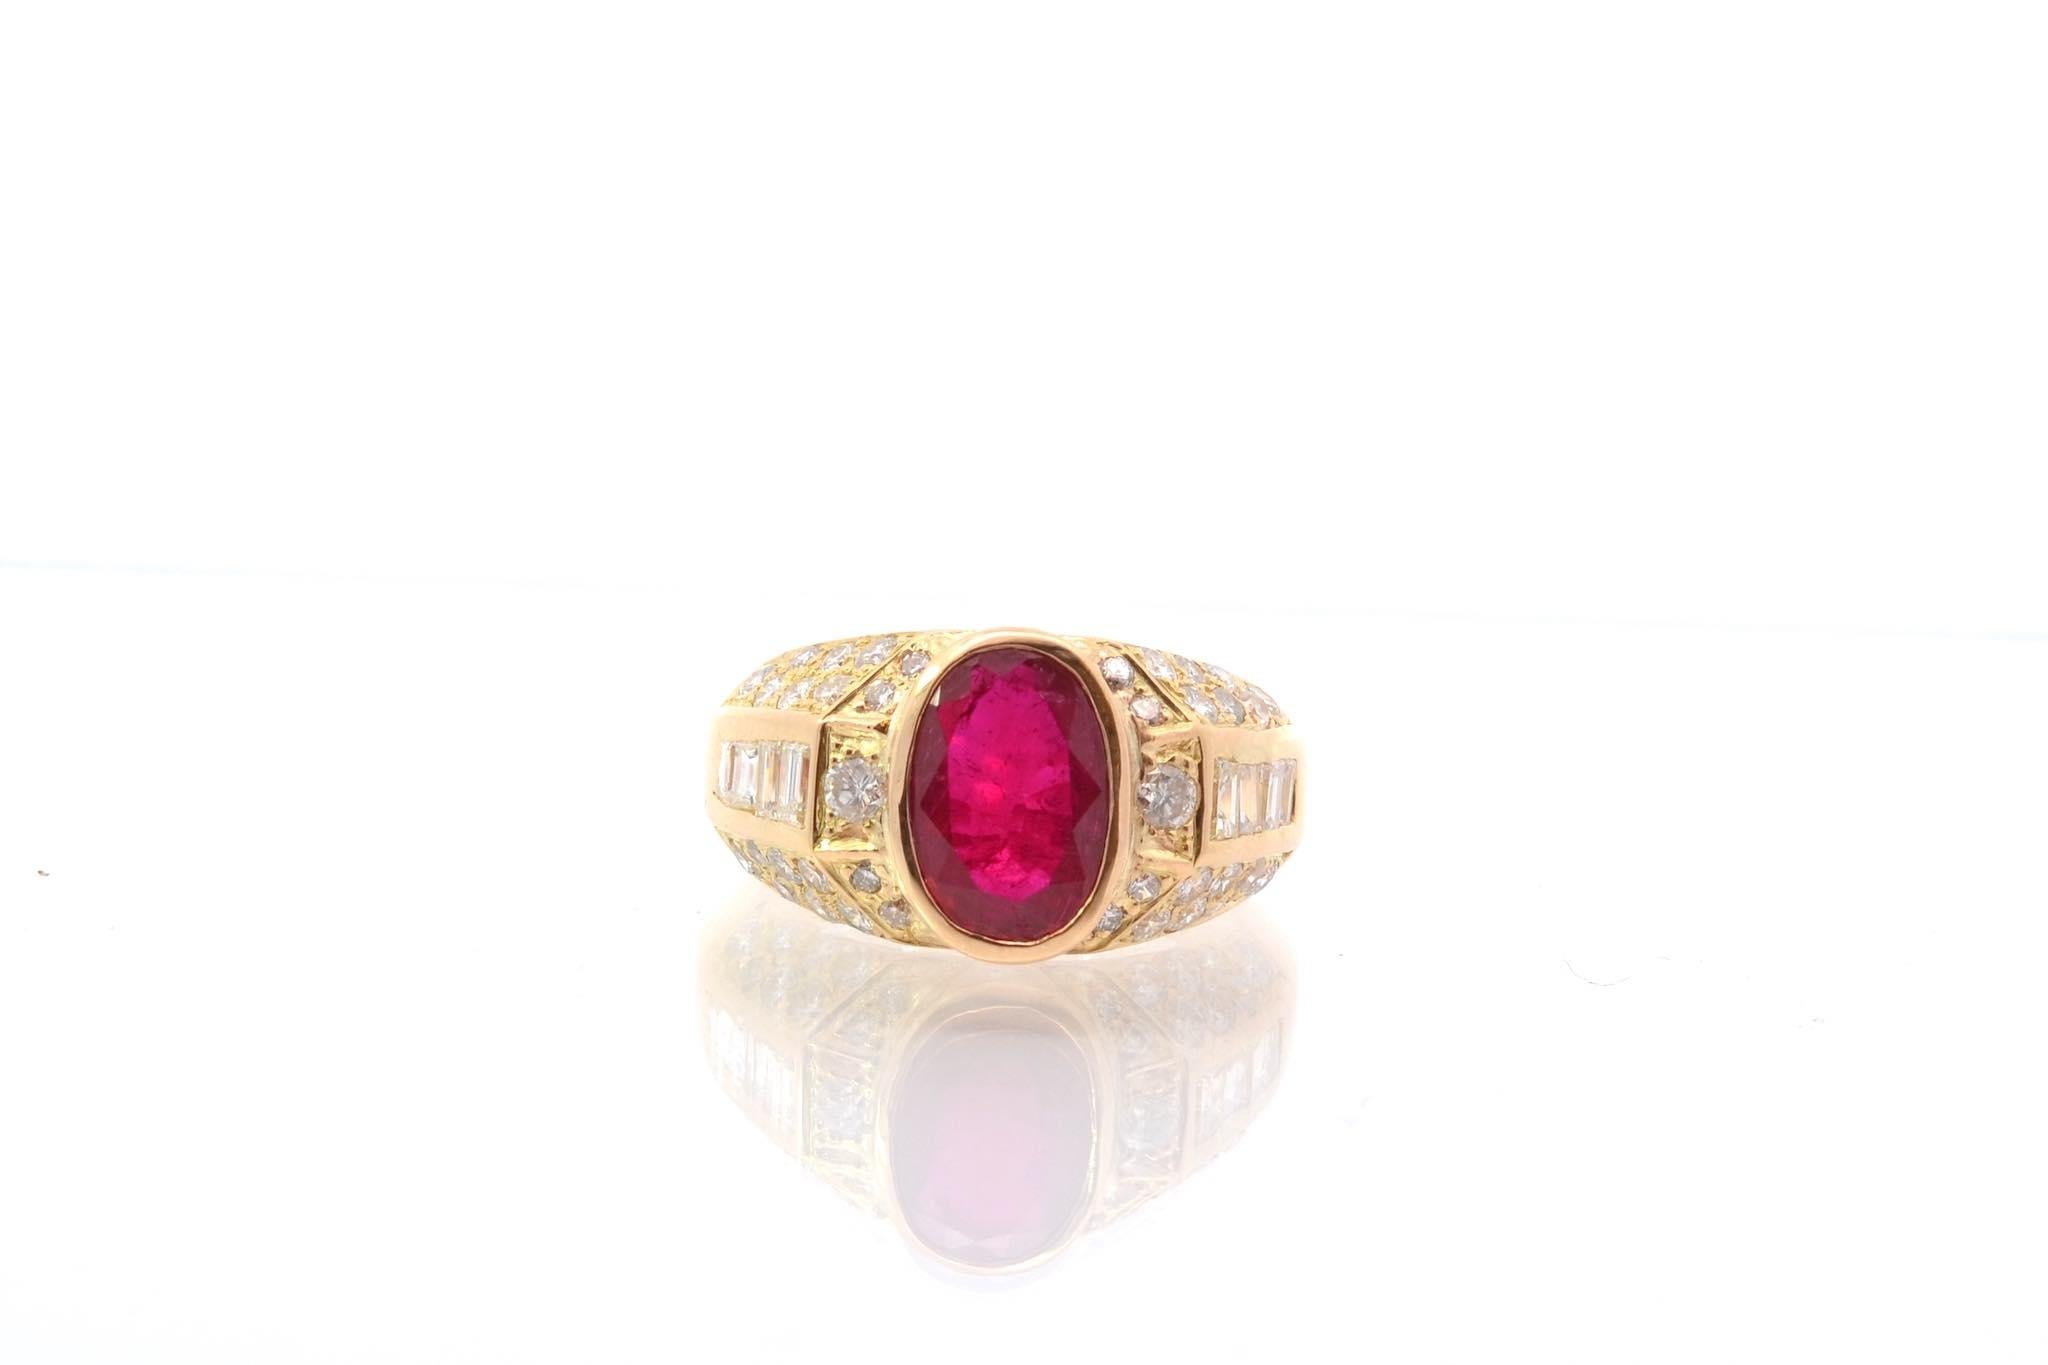 Stones: 2.57 cts ruby, 48 diamonds and 8 baguette-cut diamonds
Material: 18k yellow gold
Weight: 8.3g
Period: 1950
Size: 54 (free sizing)
Certificate
Ref. : 25549